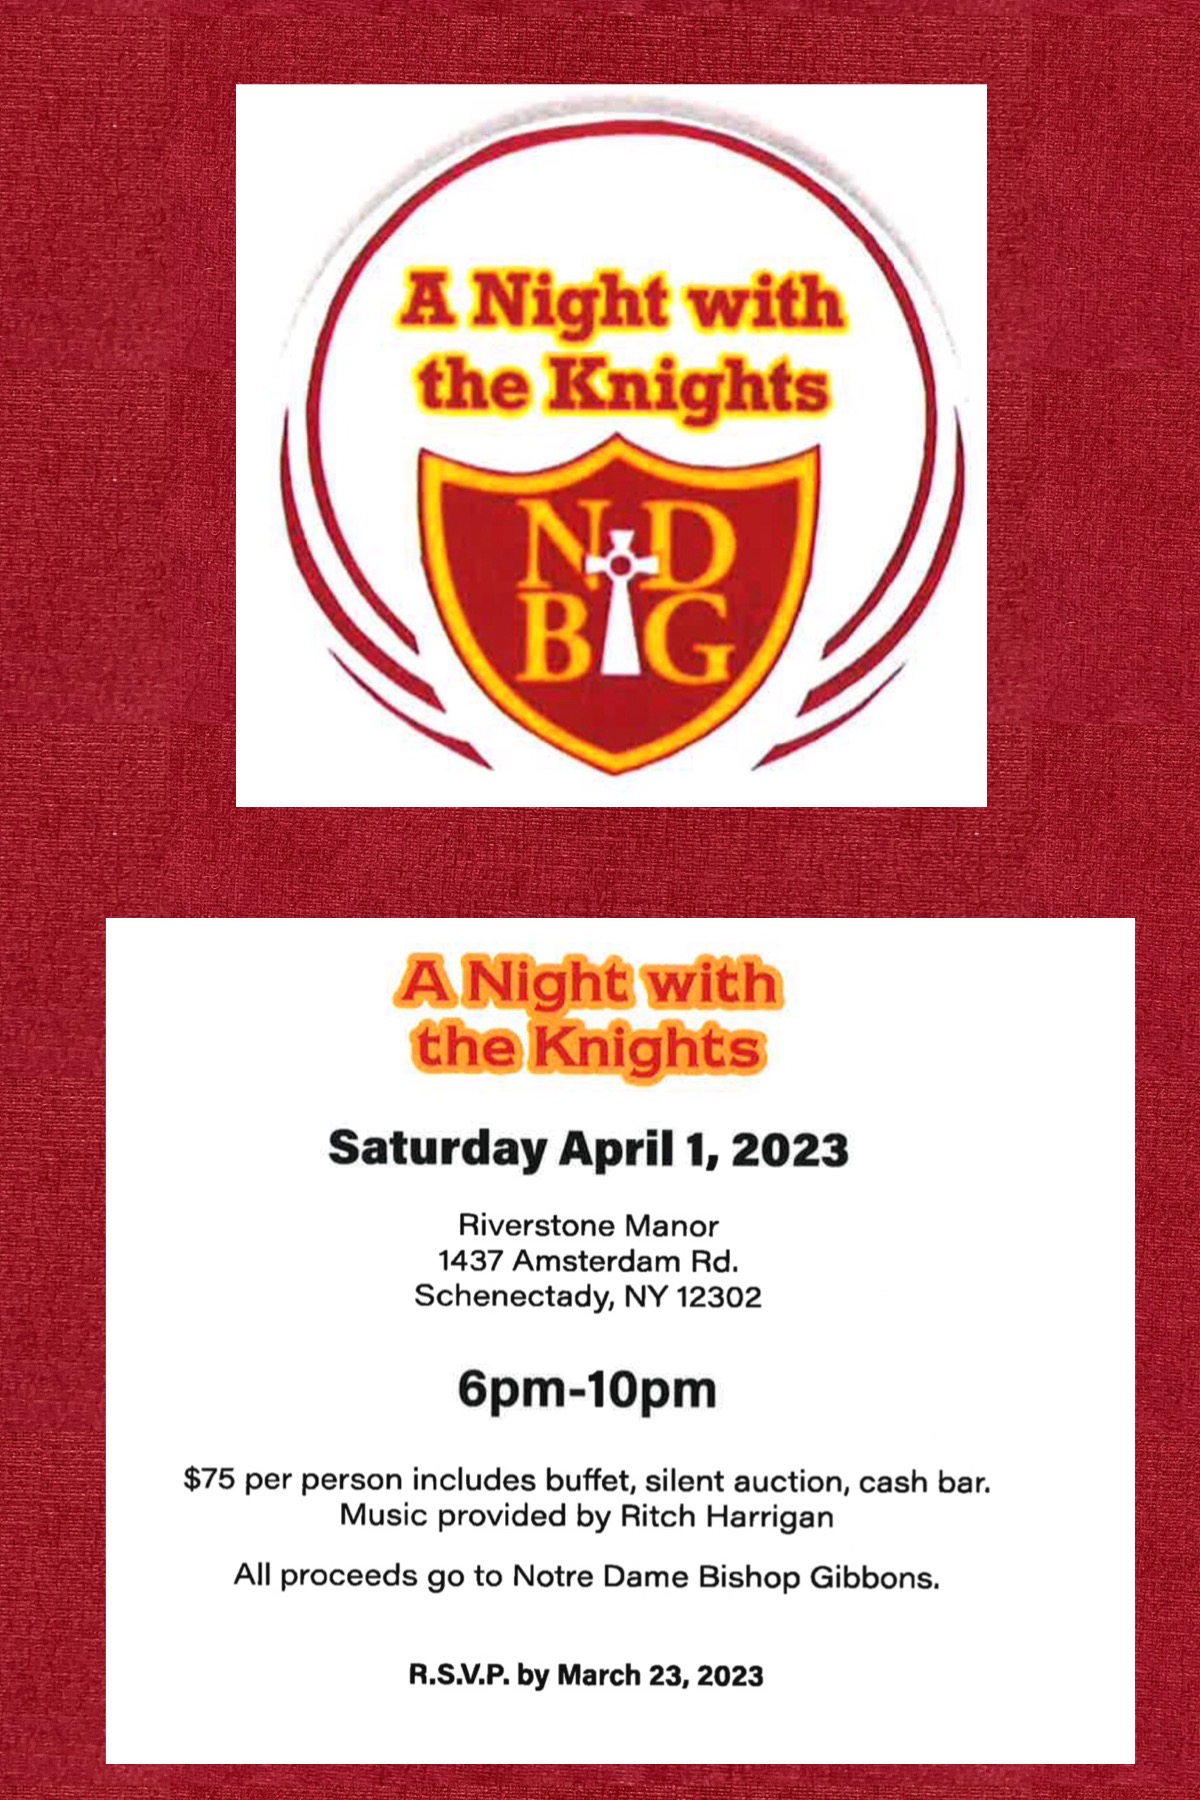 Night with the Knights Gala Saturday April 1